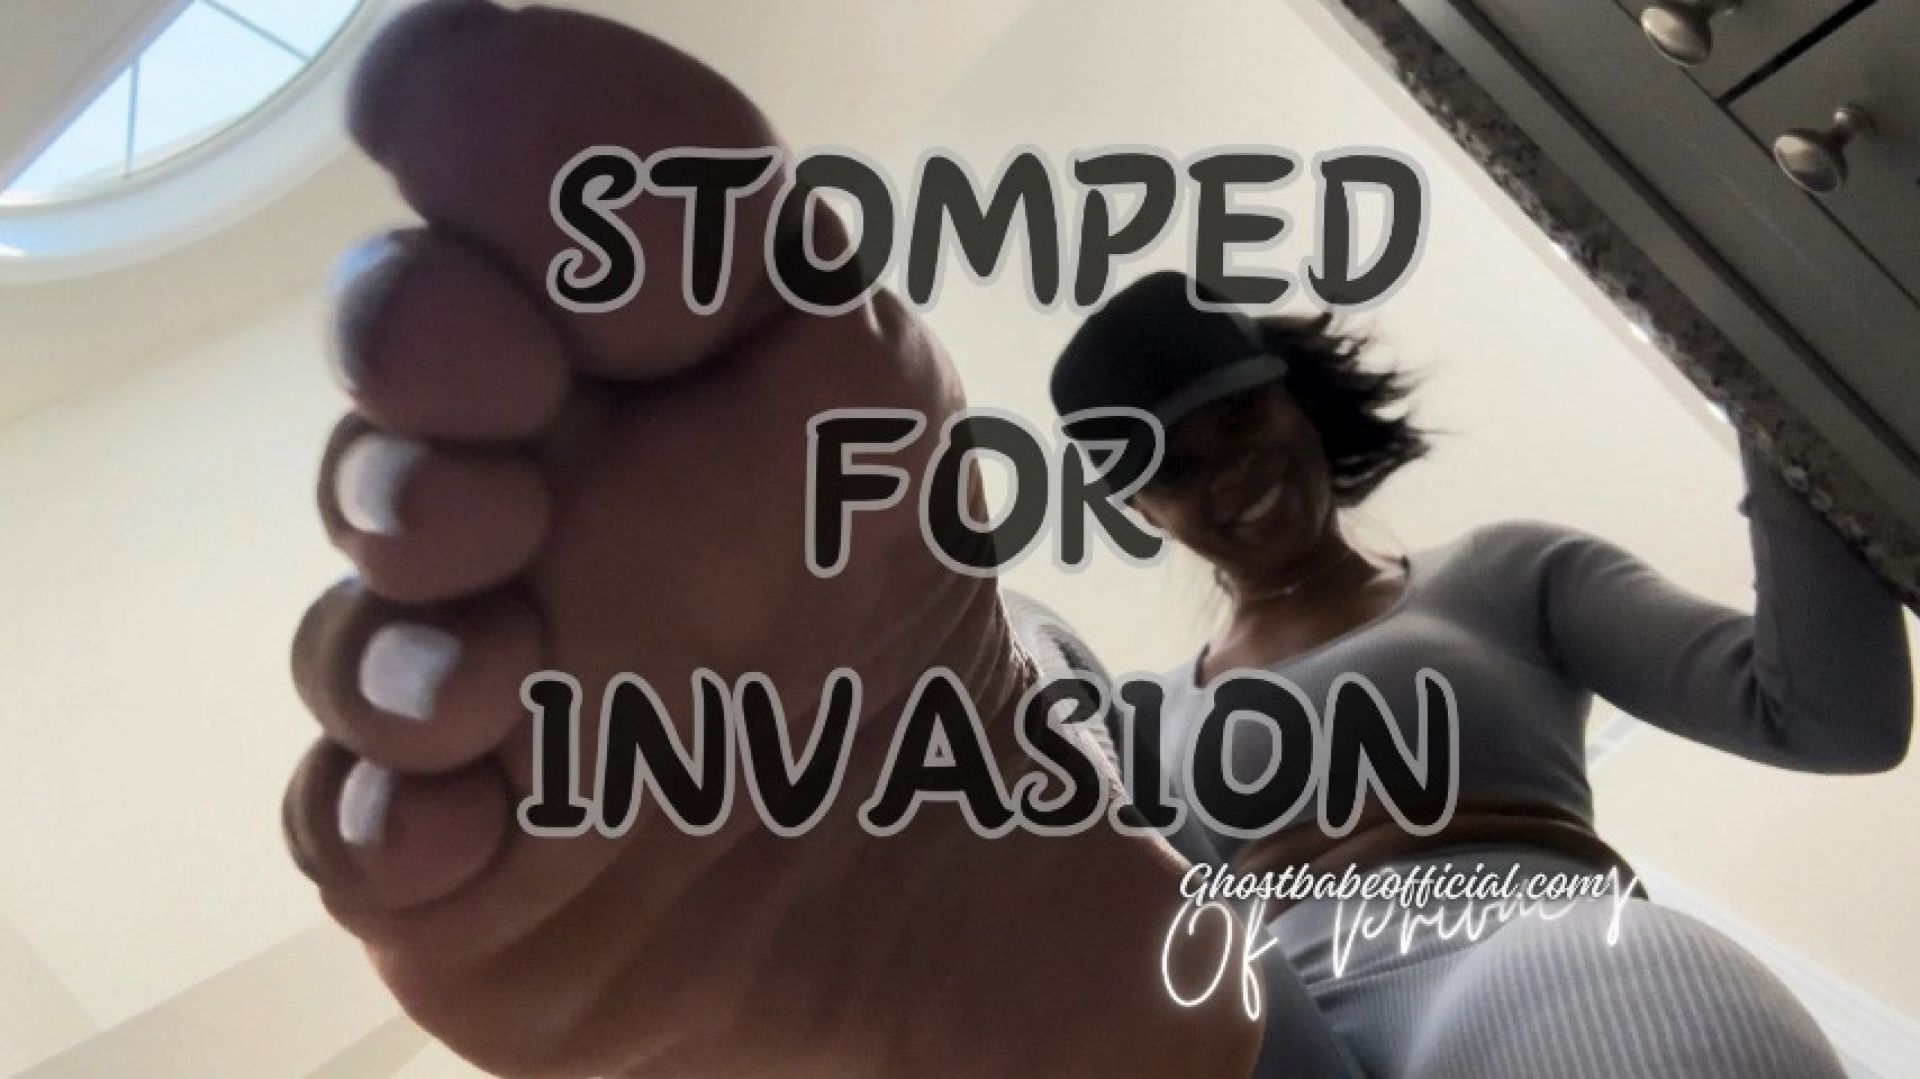 Stomped For Invasion Of Privacy